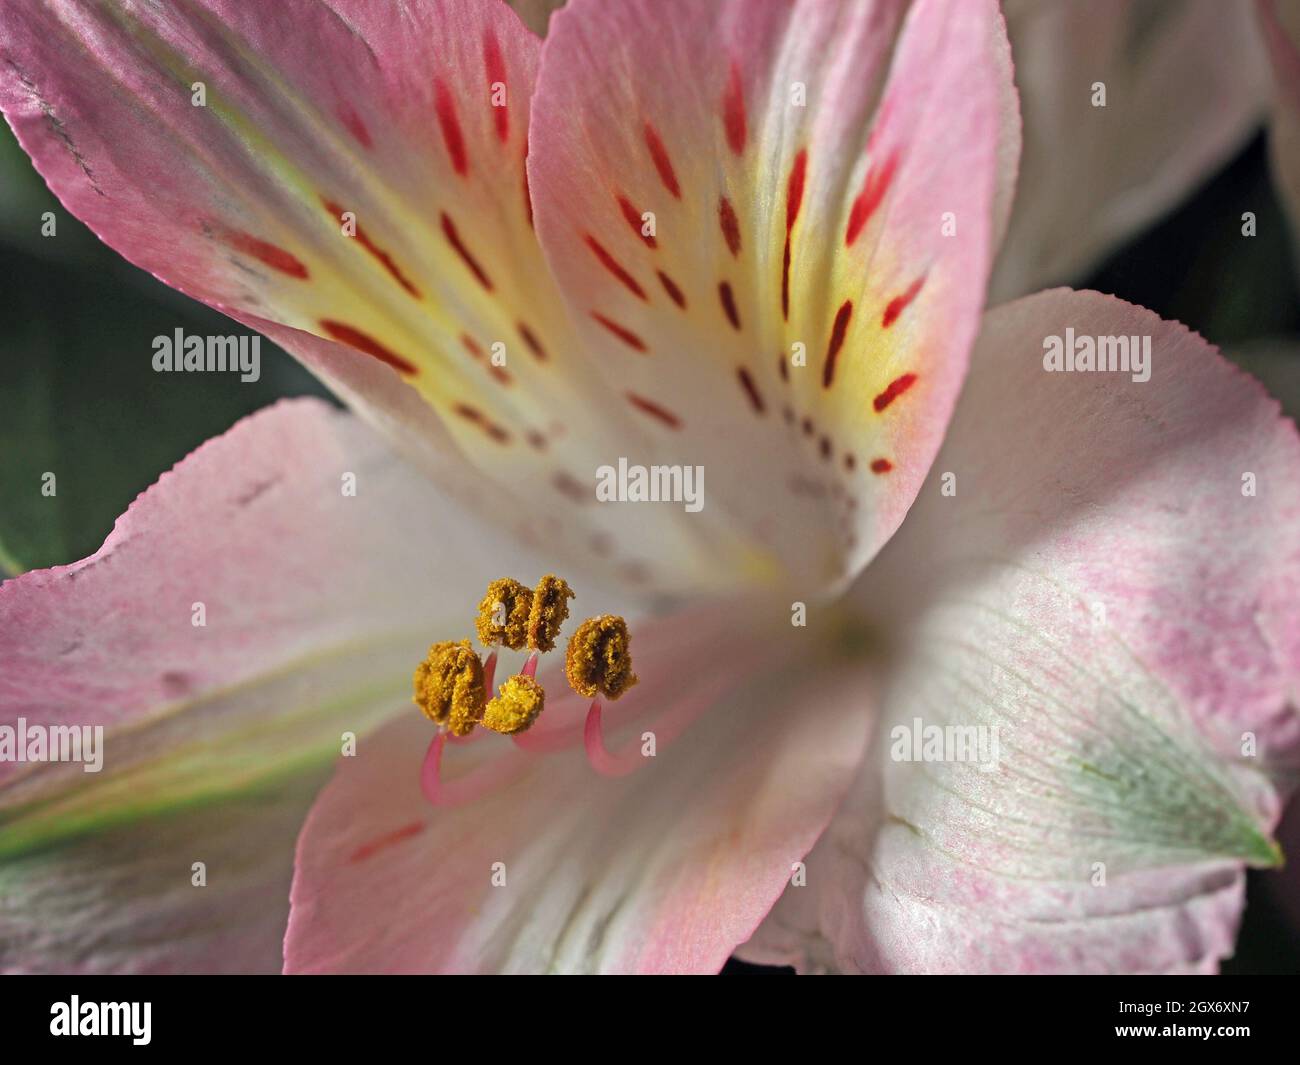 close-up detail of golden pollen stamens and petals of streaked pink exotic alstroemeria flower (Peruvian lily) Cumbria, England, UK Stock Photo